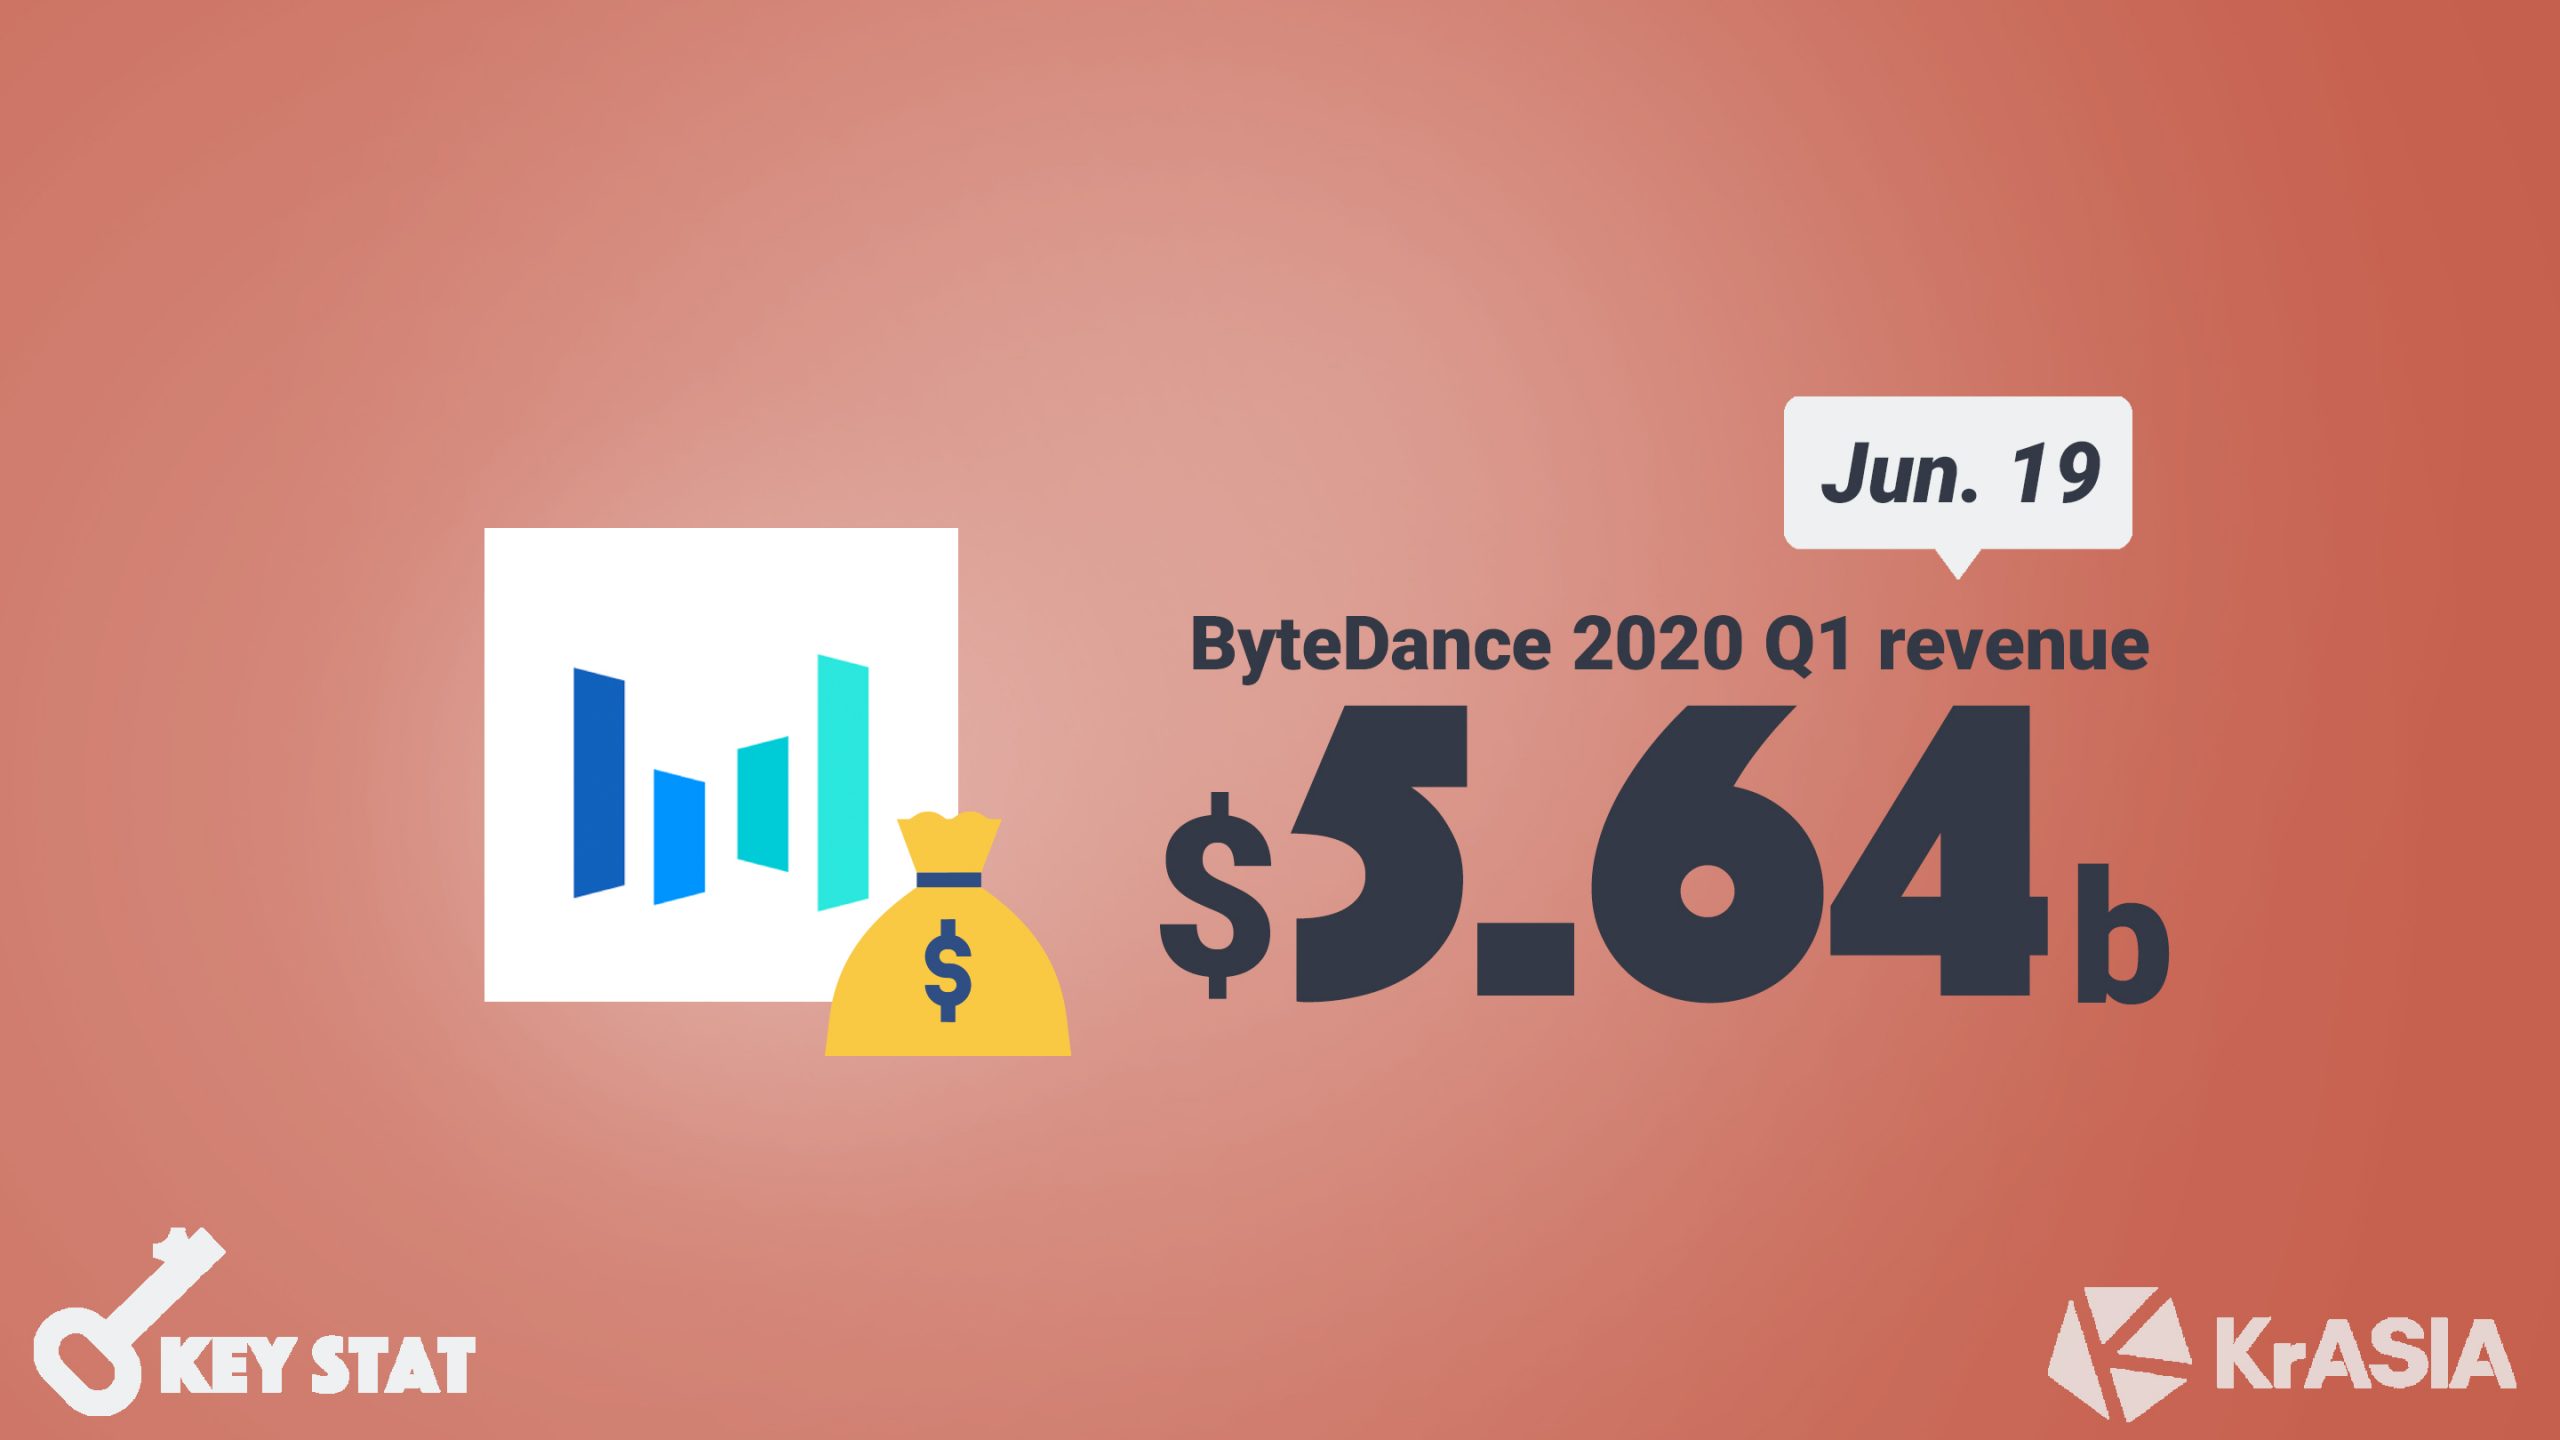 KEY STAT | ByteDance first quarter revenues up 130% with annual target half of Tencent’s 2019 earnings [Update]